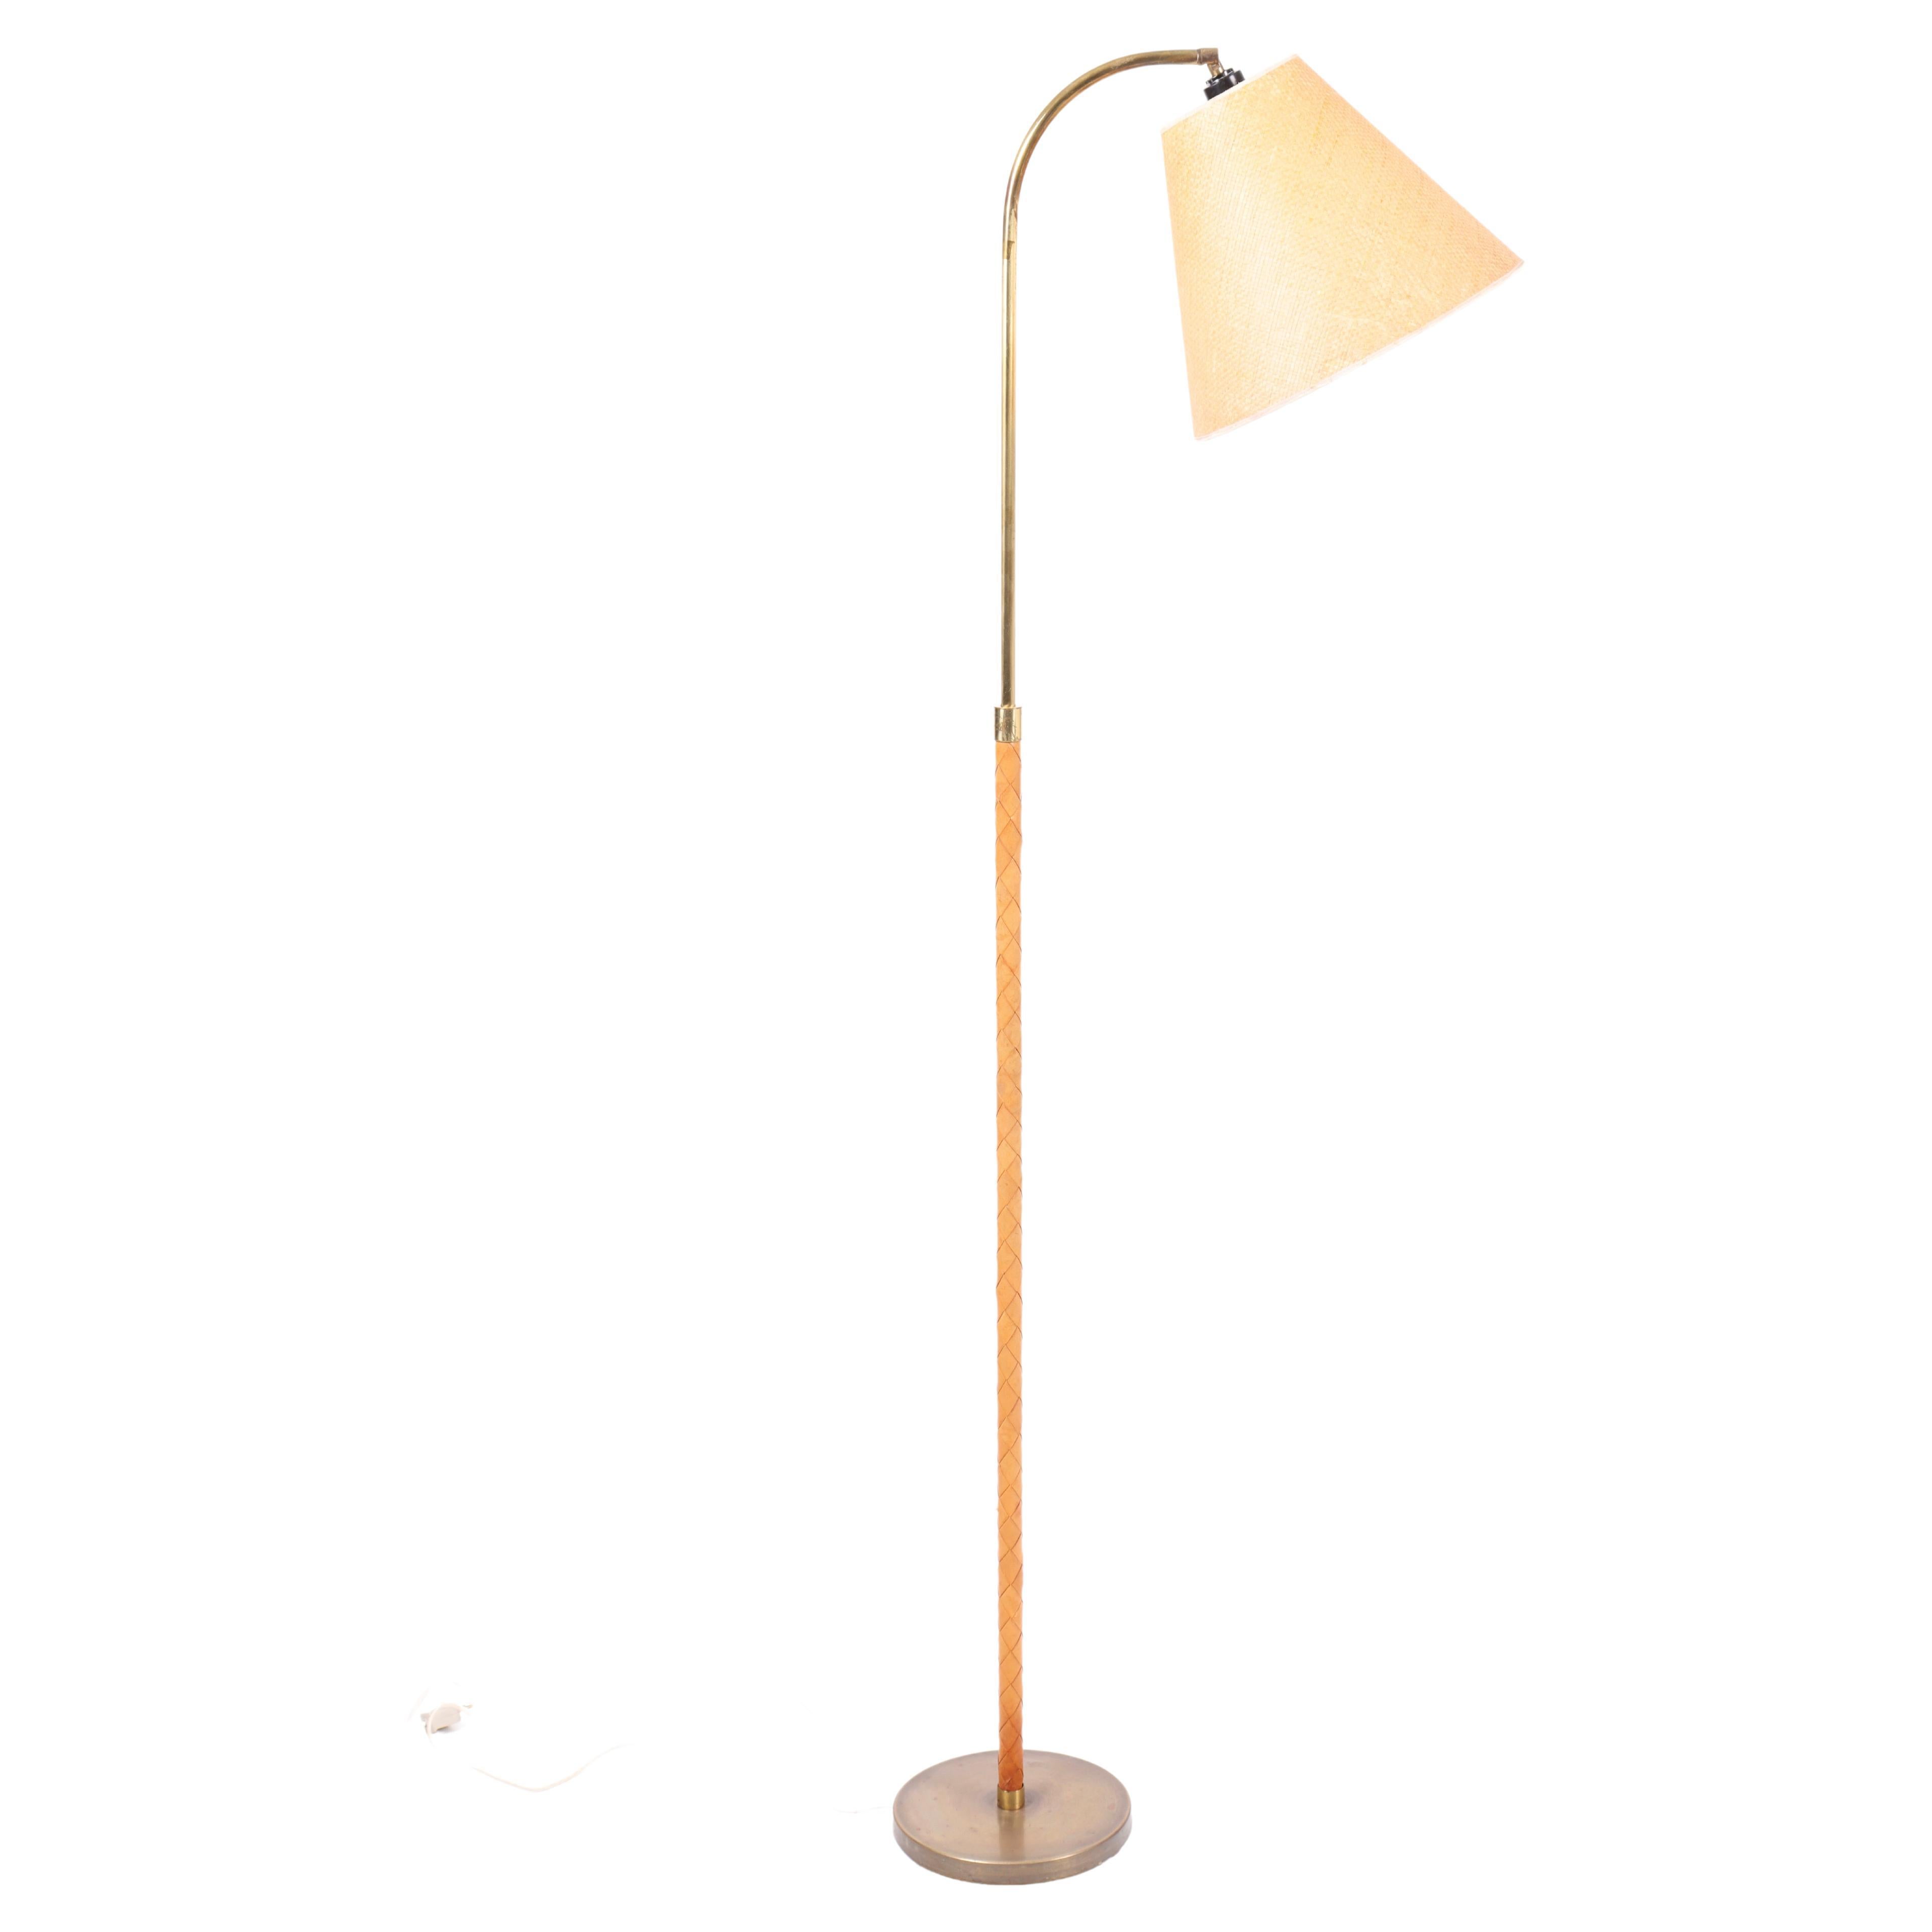 Midcentury Floor Lamp in Brass and Leather, Made in Denmark, 1960s For Sale